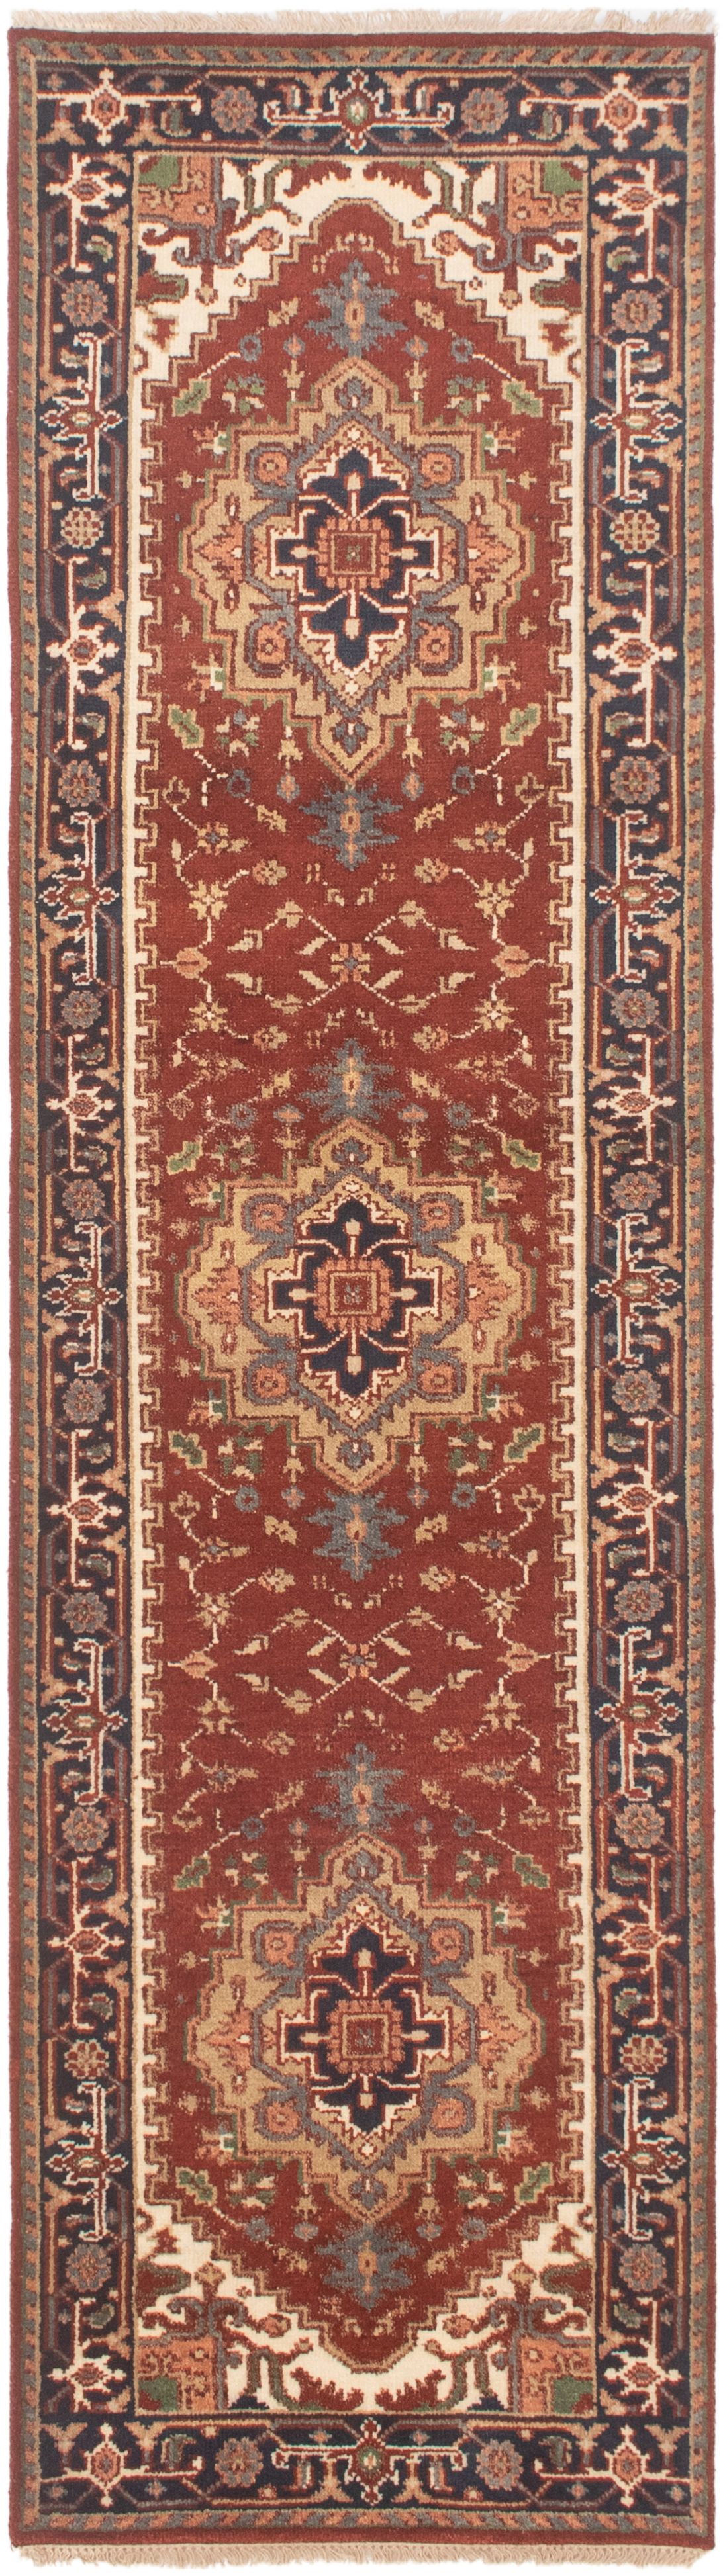 Hand-knotted Serapi Heritage Dark Copper Wool Rug 2'7" x 9'11" (14) Size: 2'7" x 9'11"  